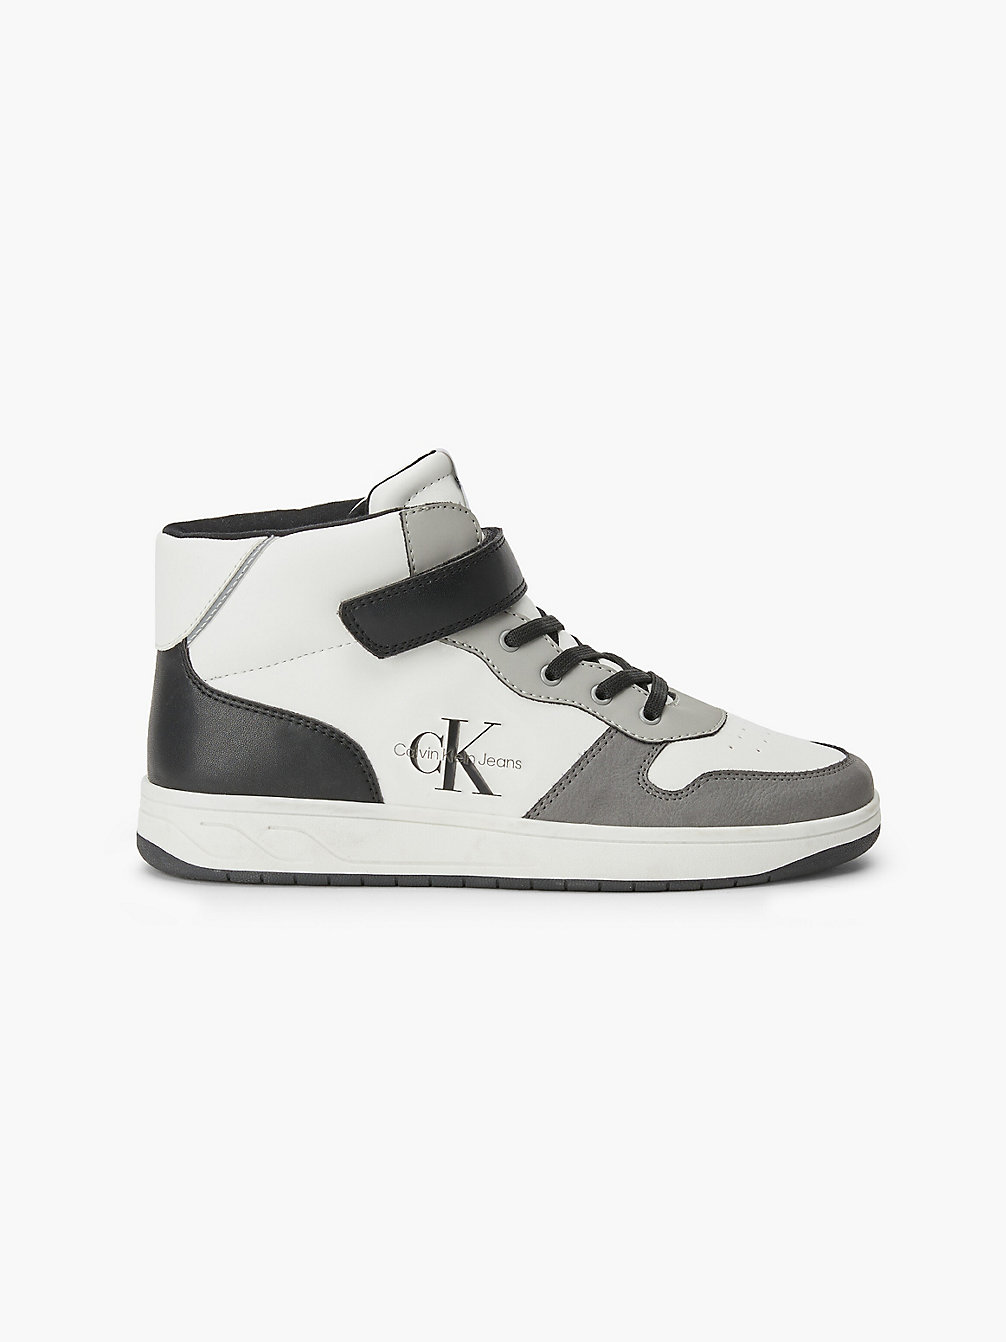 GREY/WHITE/BLACK Recycled Kids High-Top Trainers undefined kids unisex Calvin Klein